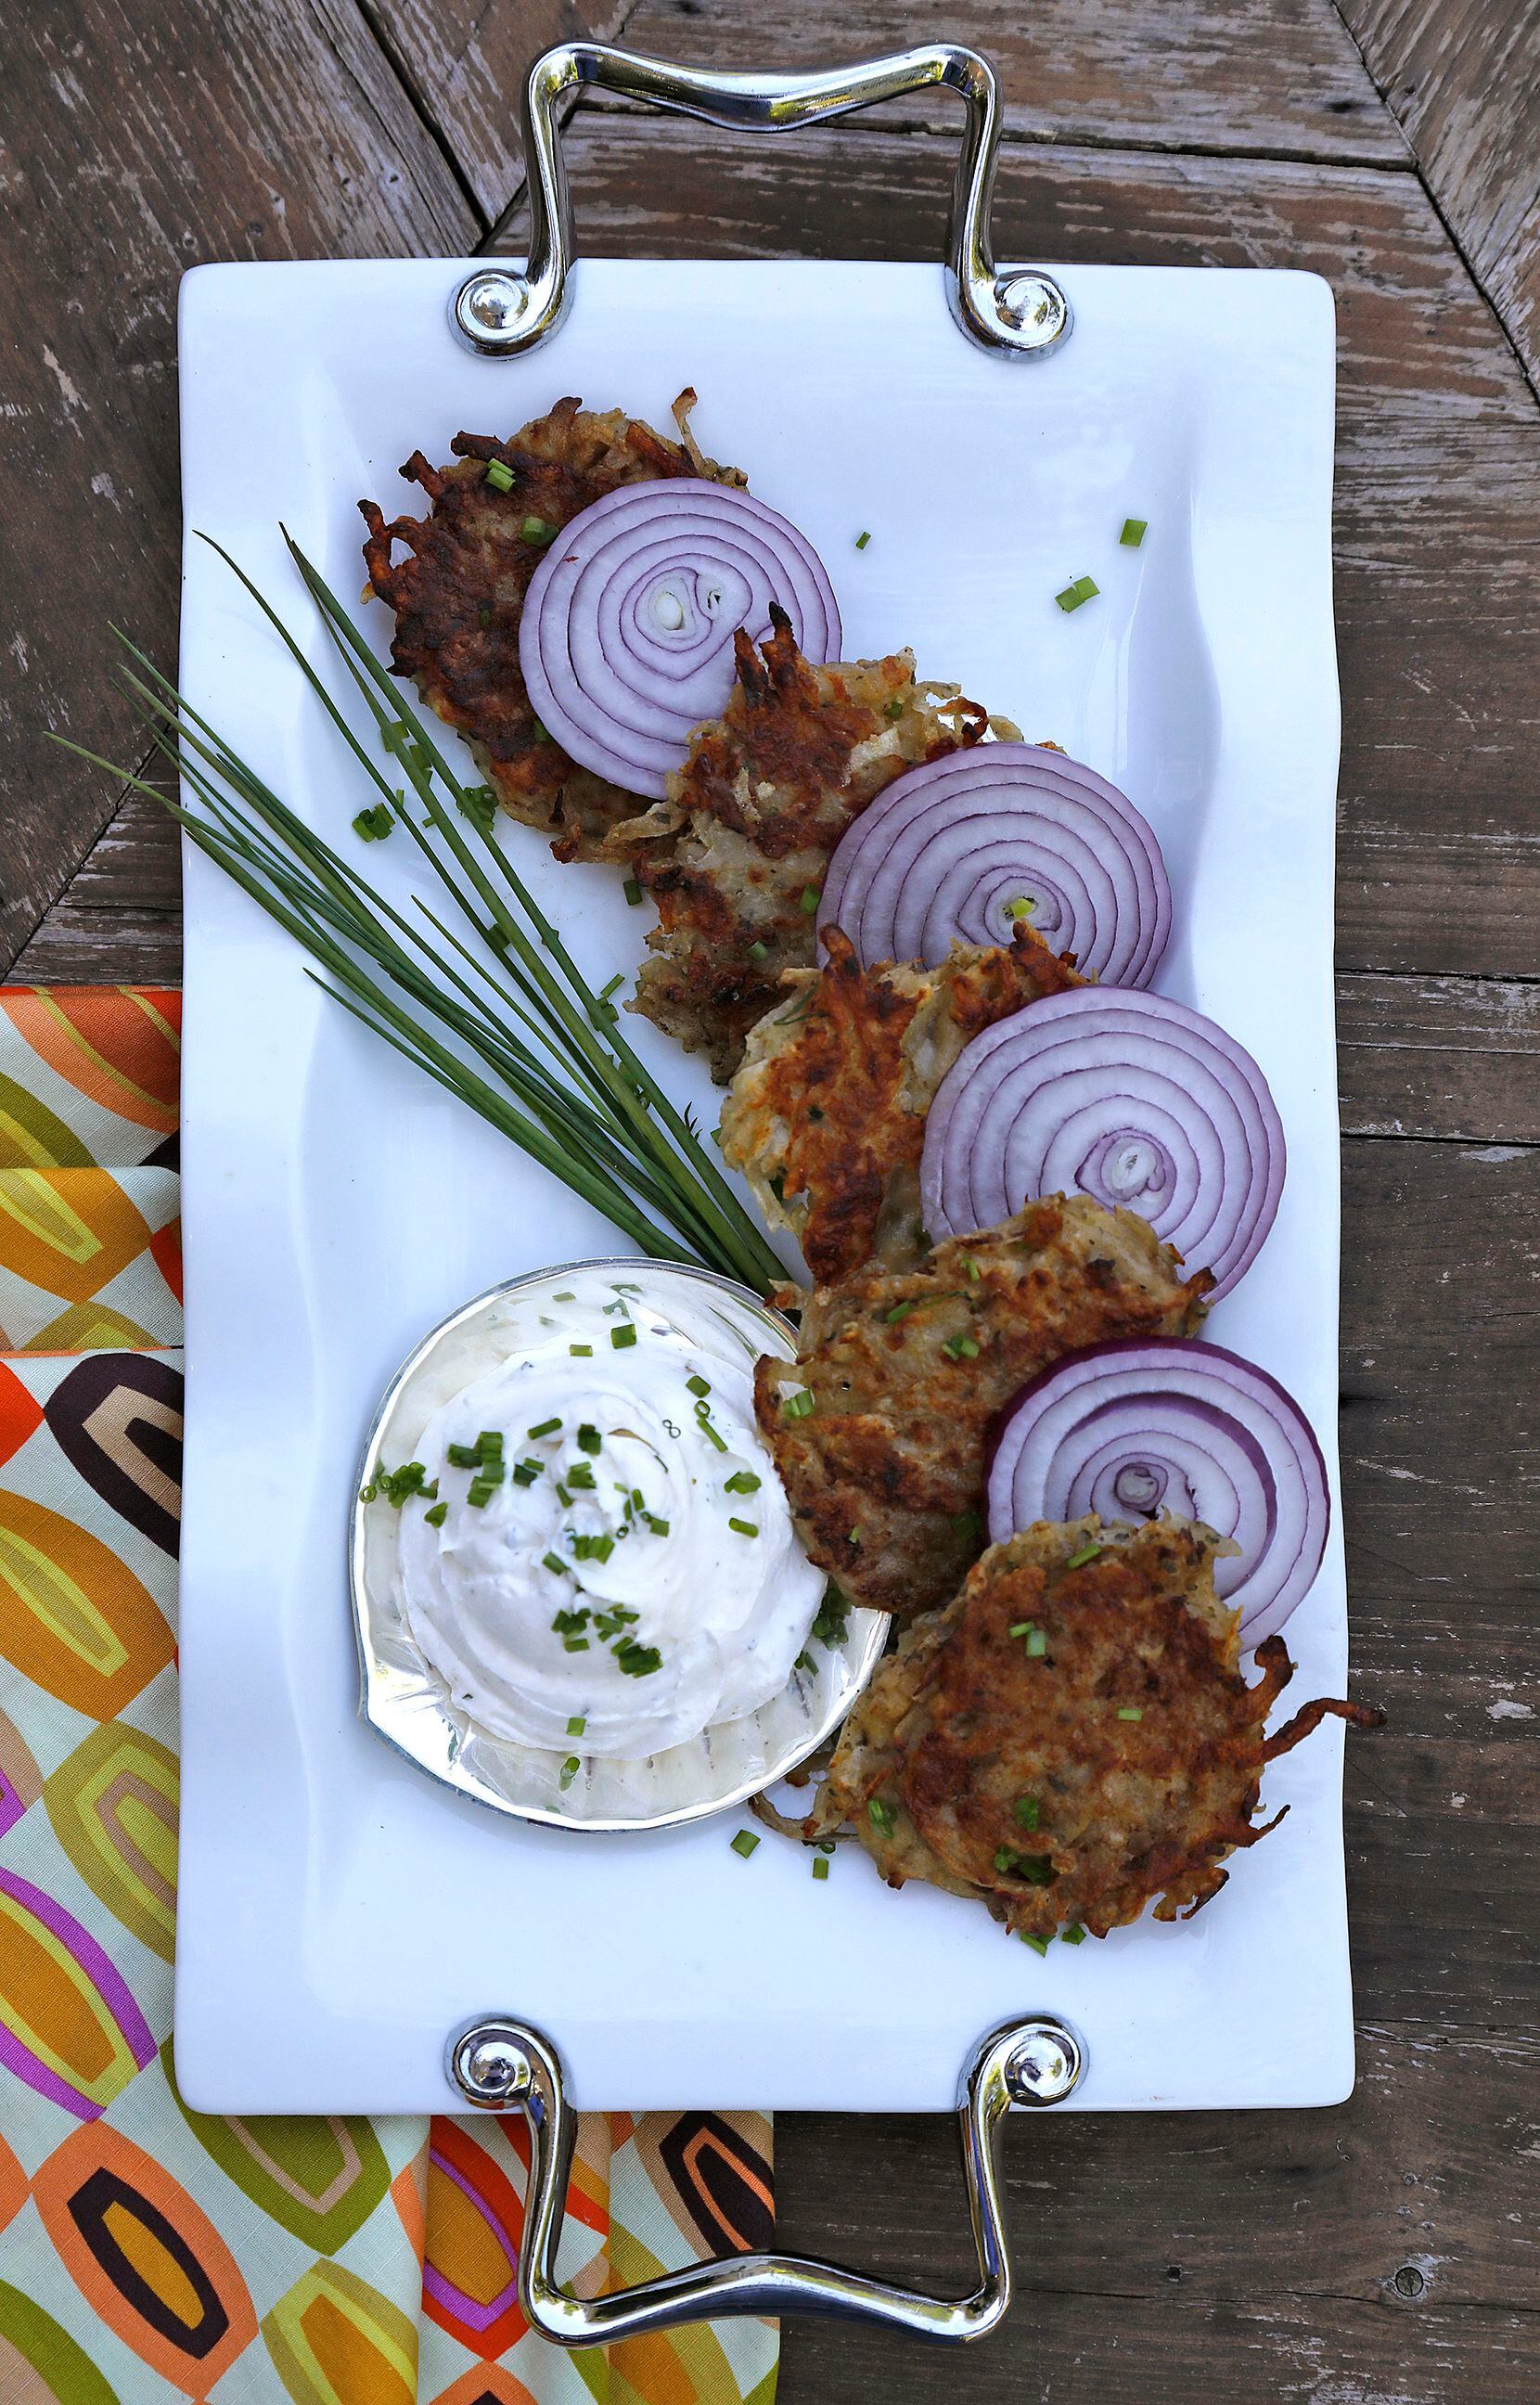 Ranched Latkes with ranch dip 